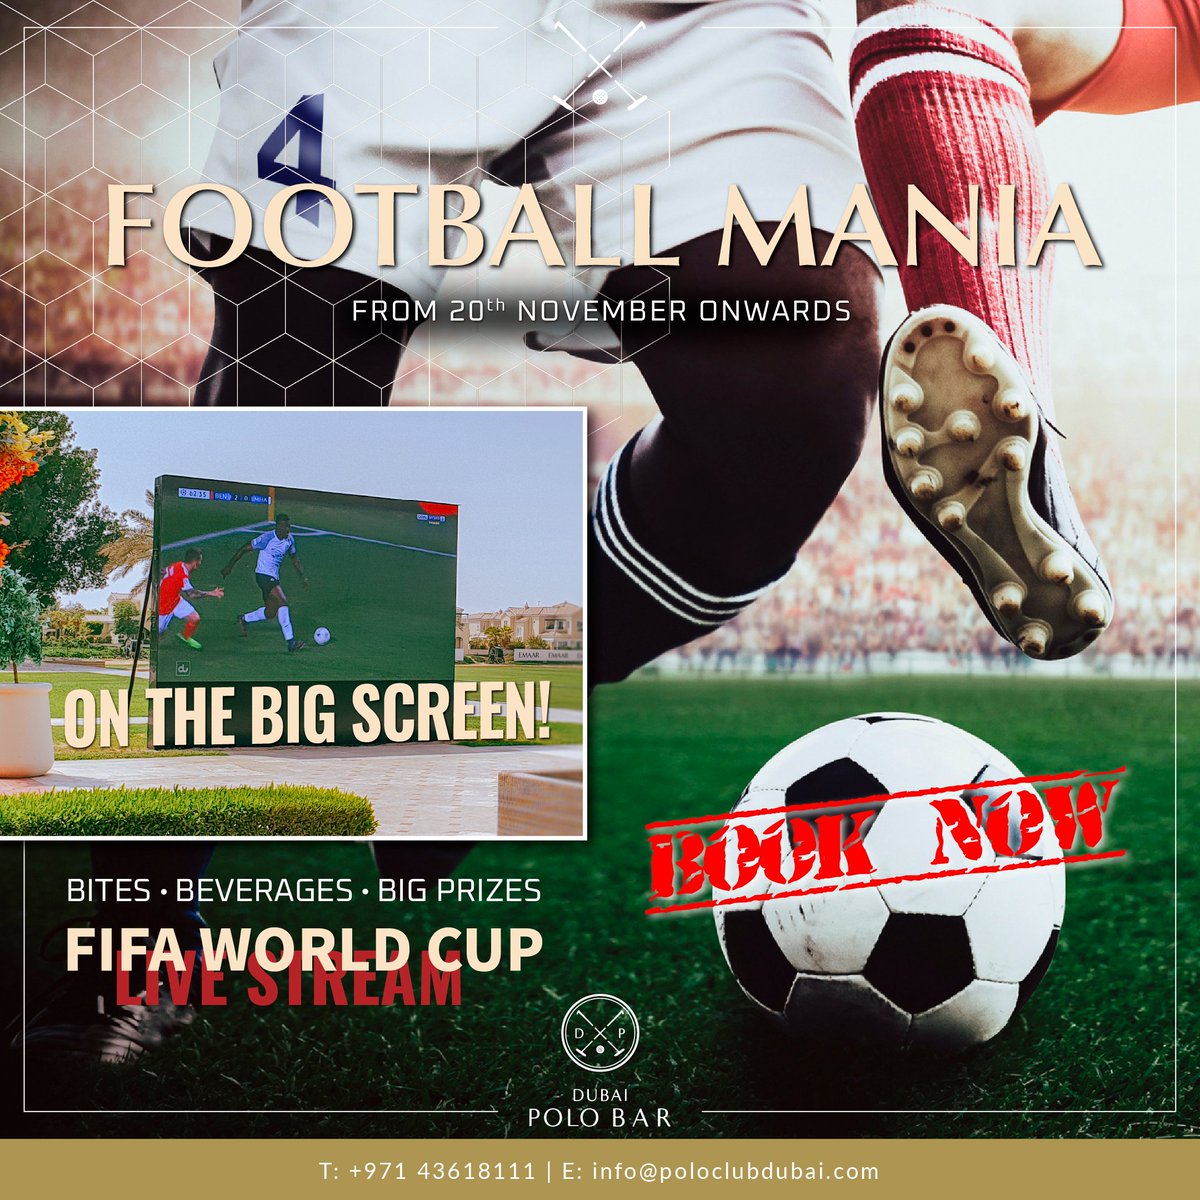 We'll bring you the FIFA World Cup 2022 in Dubai! Watch the fun and action of the world's much-awaited football matches LIVE on Dubai Polo Bar's big screen! You'll have the breathtaking polo fields as your backdrop Delicious bites, beverages, and big prizes!